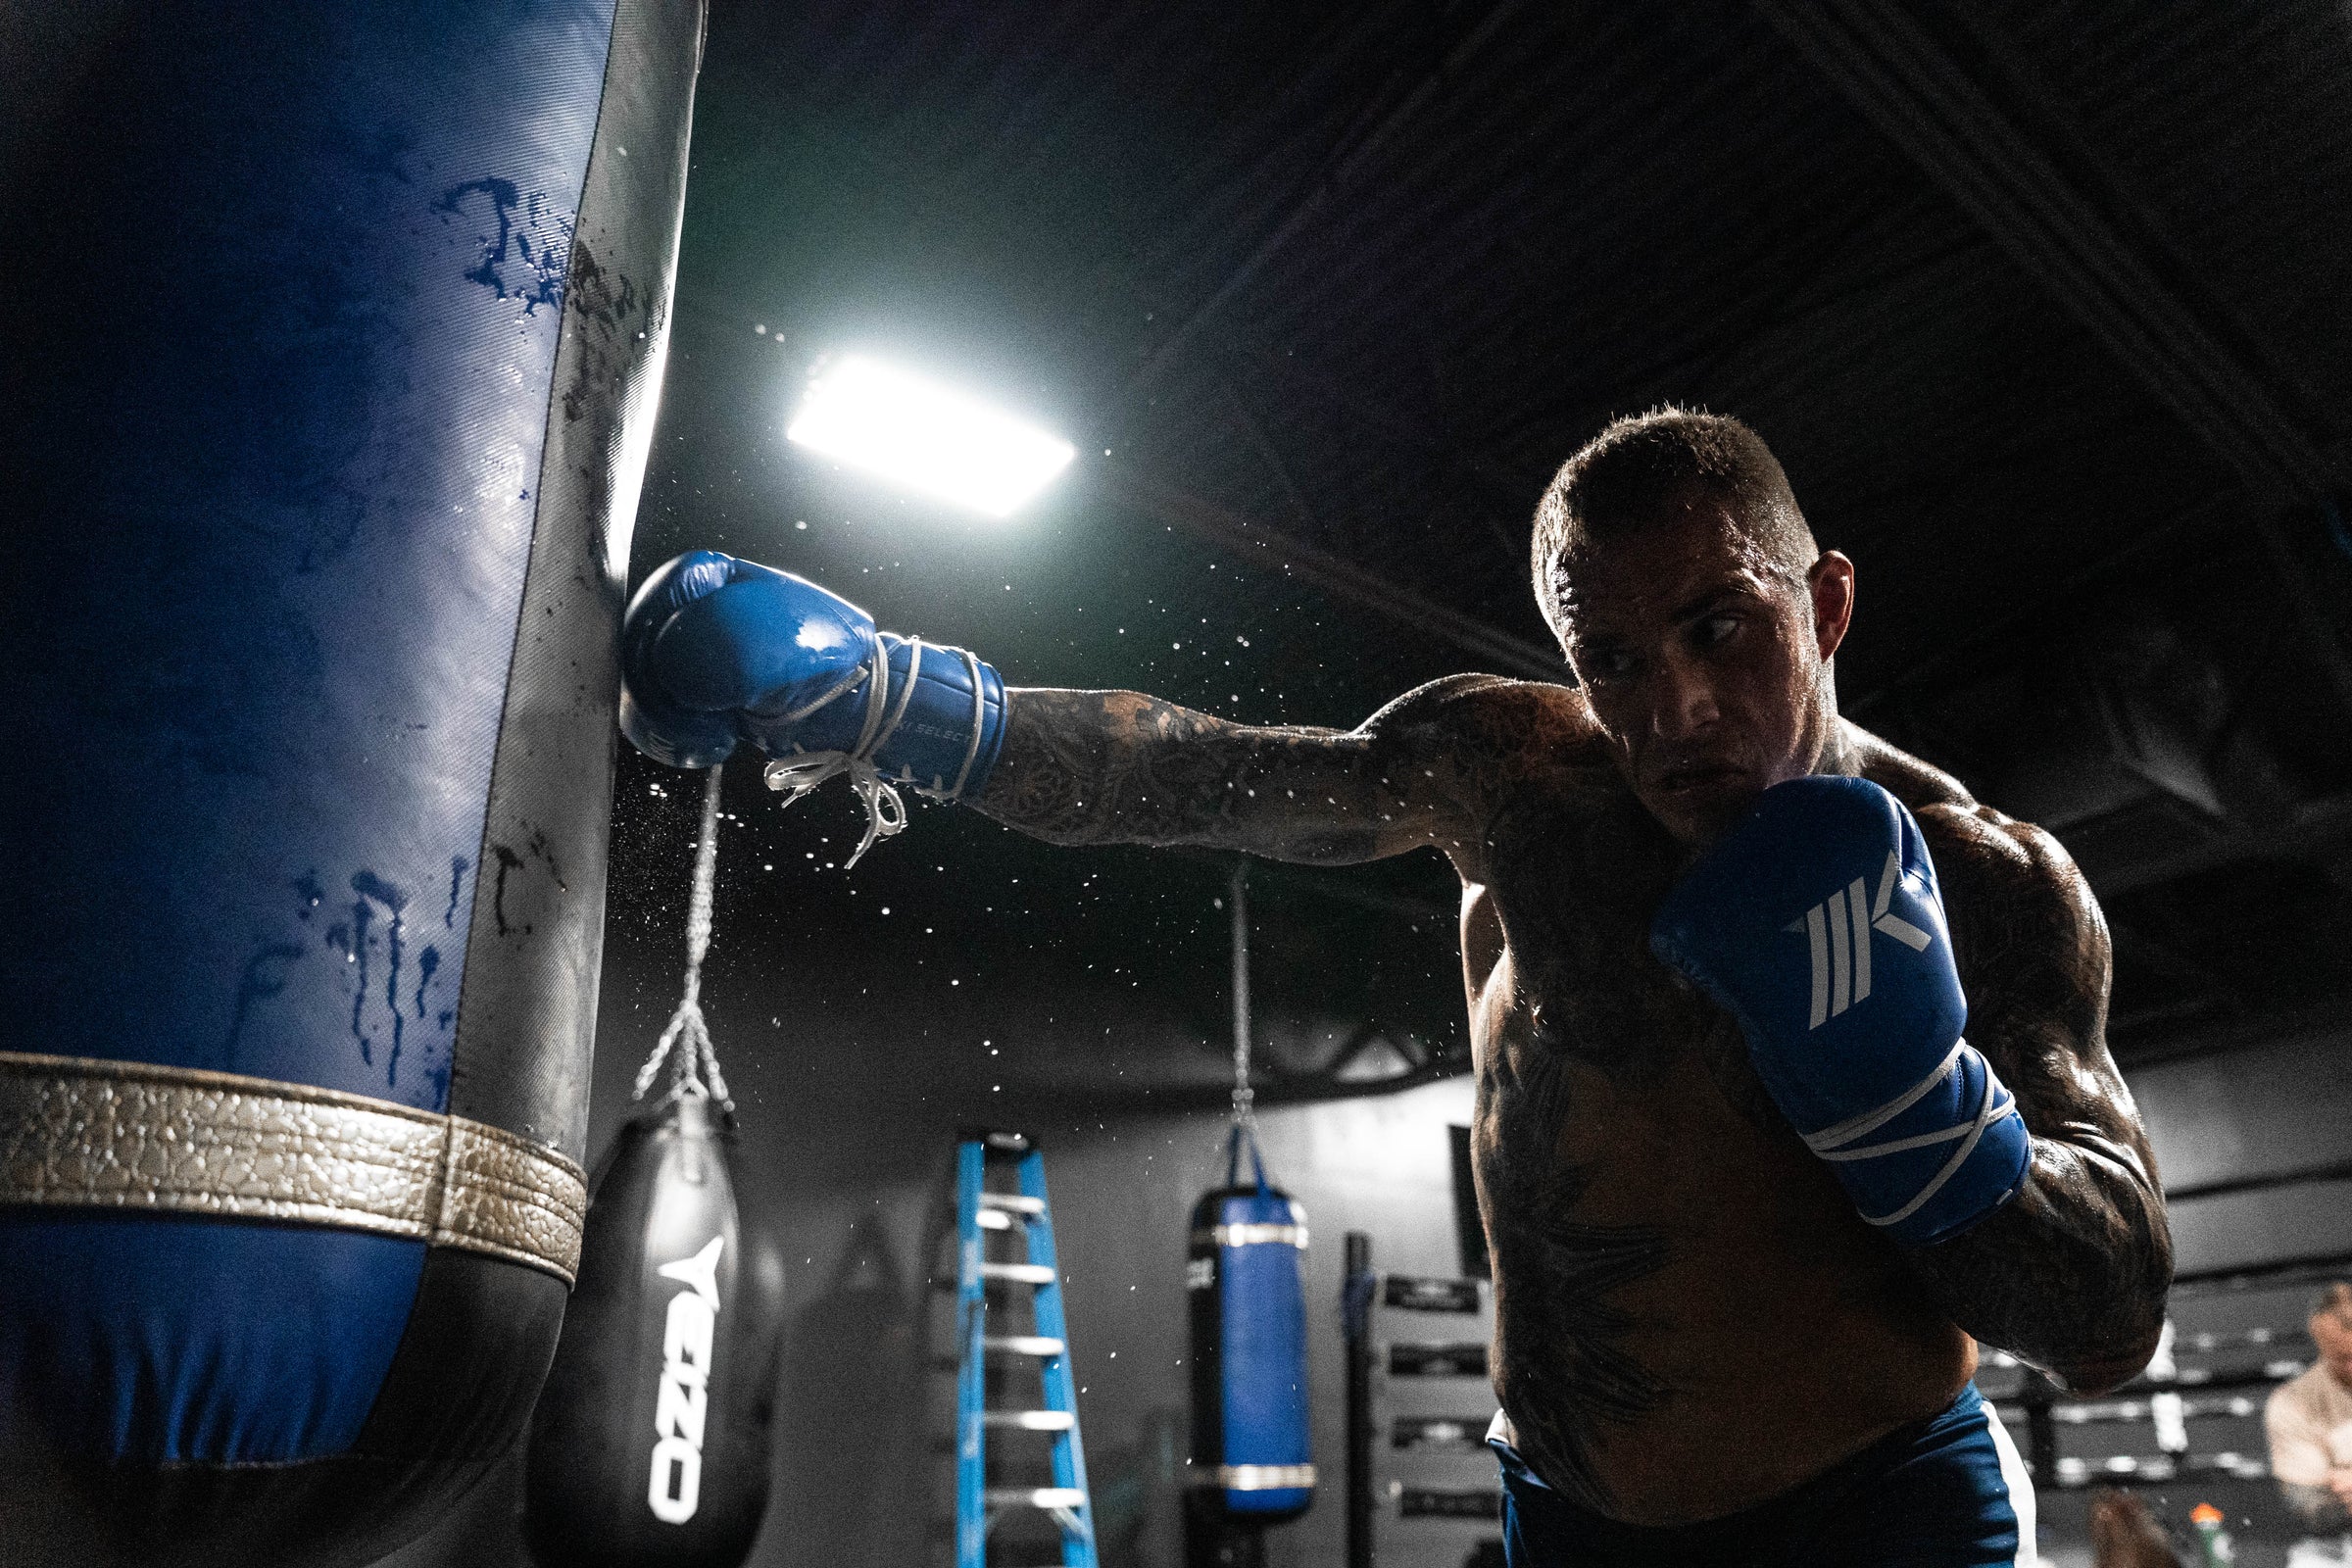 Professional fighter Jake Bostwick punching the heavy bag with MK1's Select Lace Up Boxing Gloves during the closeout of a training camp for an upcoming fight.  